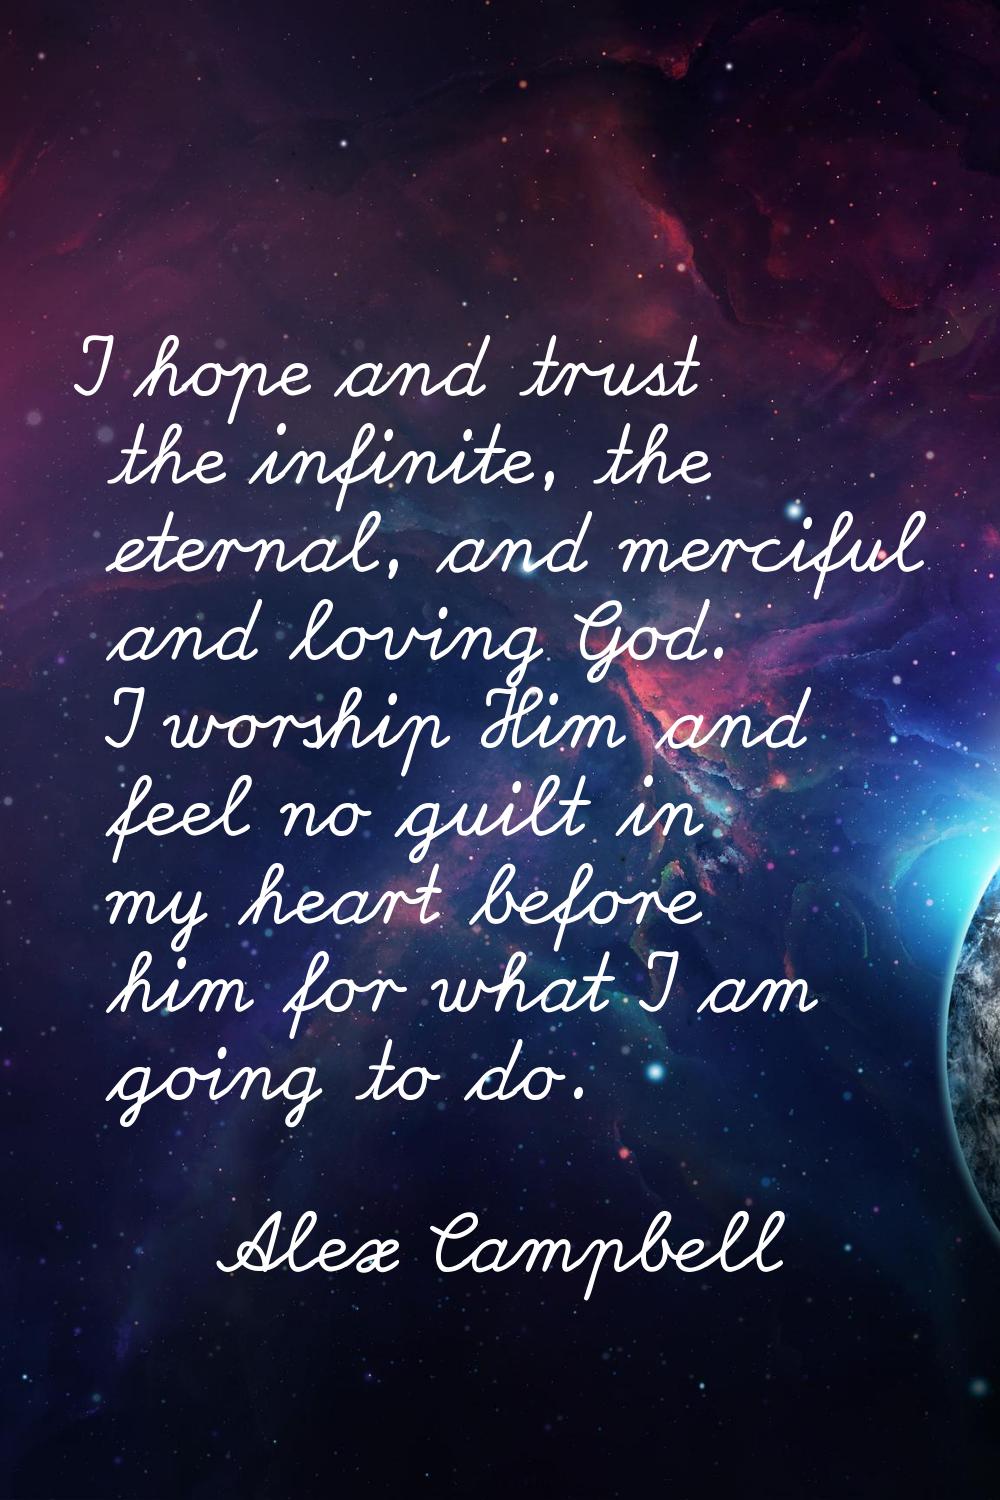 I hope and trust the infinite, the eternal, and merciful and loving God. I worship Him and feel no 